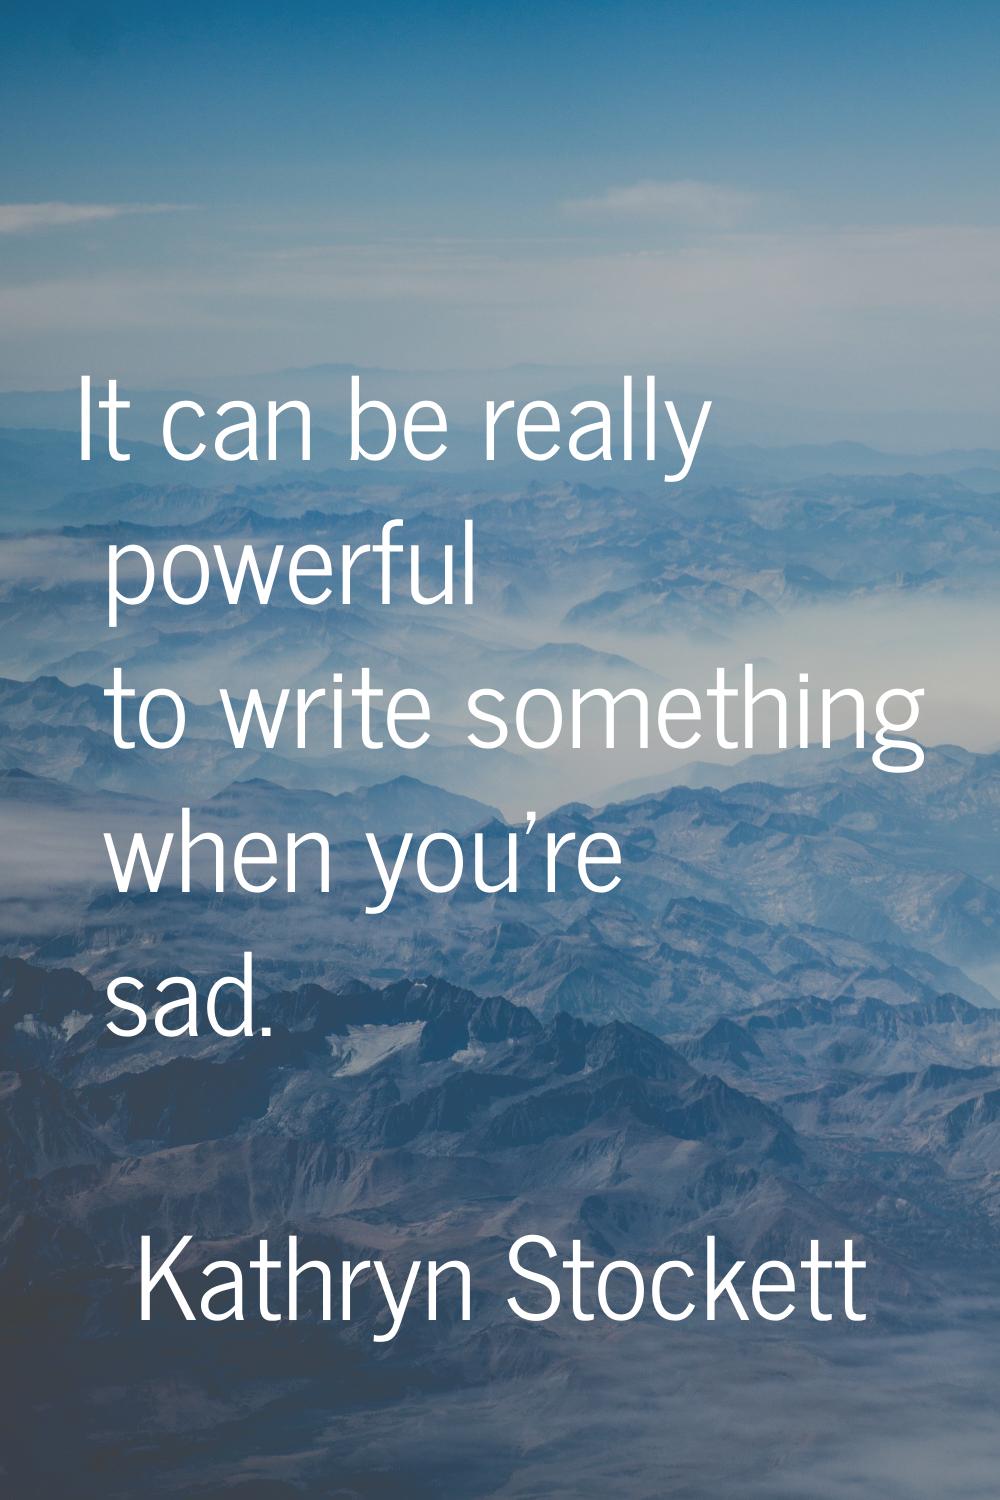 It can be really powerful to write something when you're sad.